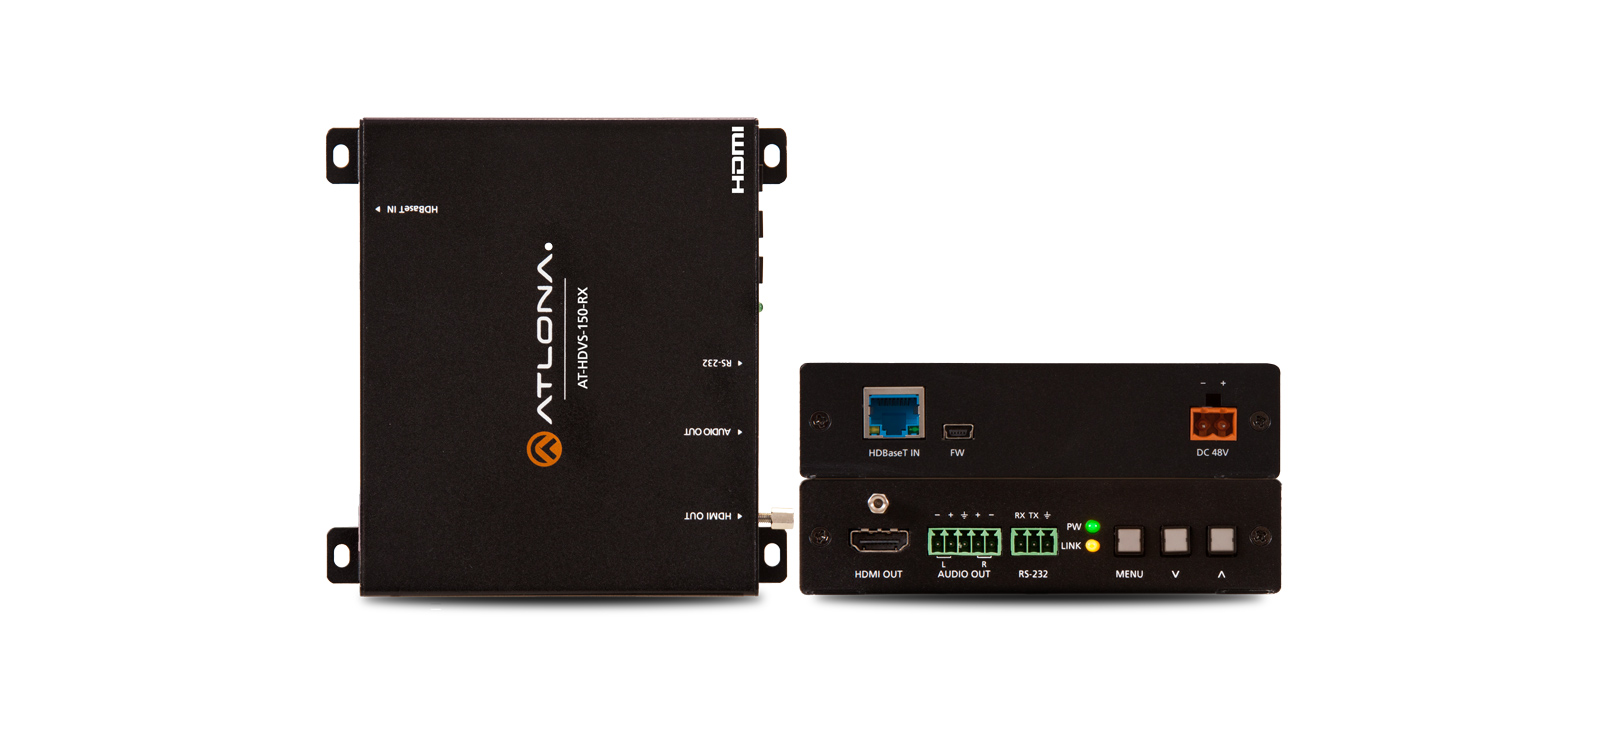 Three-Input HD Video Scaler for HDMI and VGA Signals